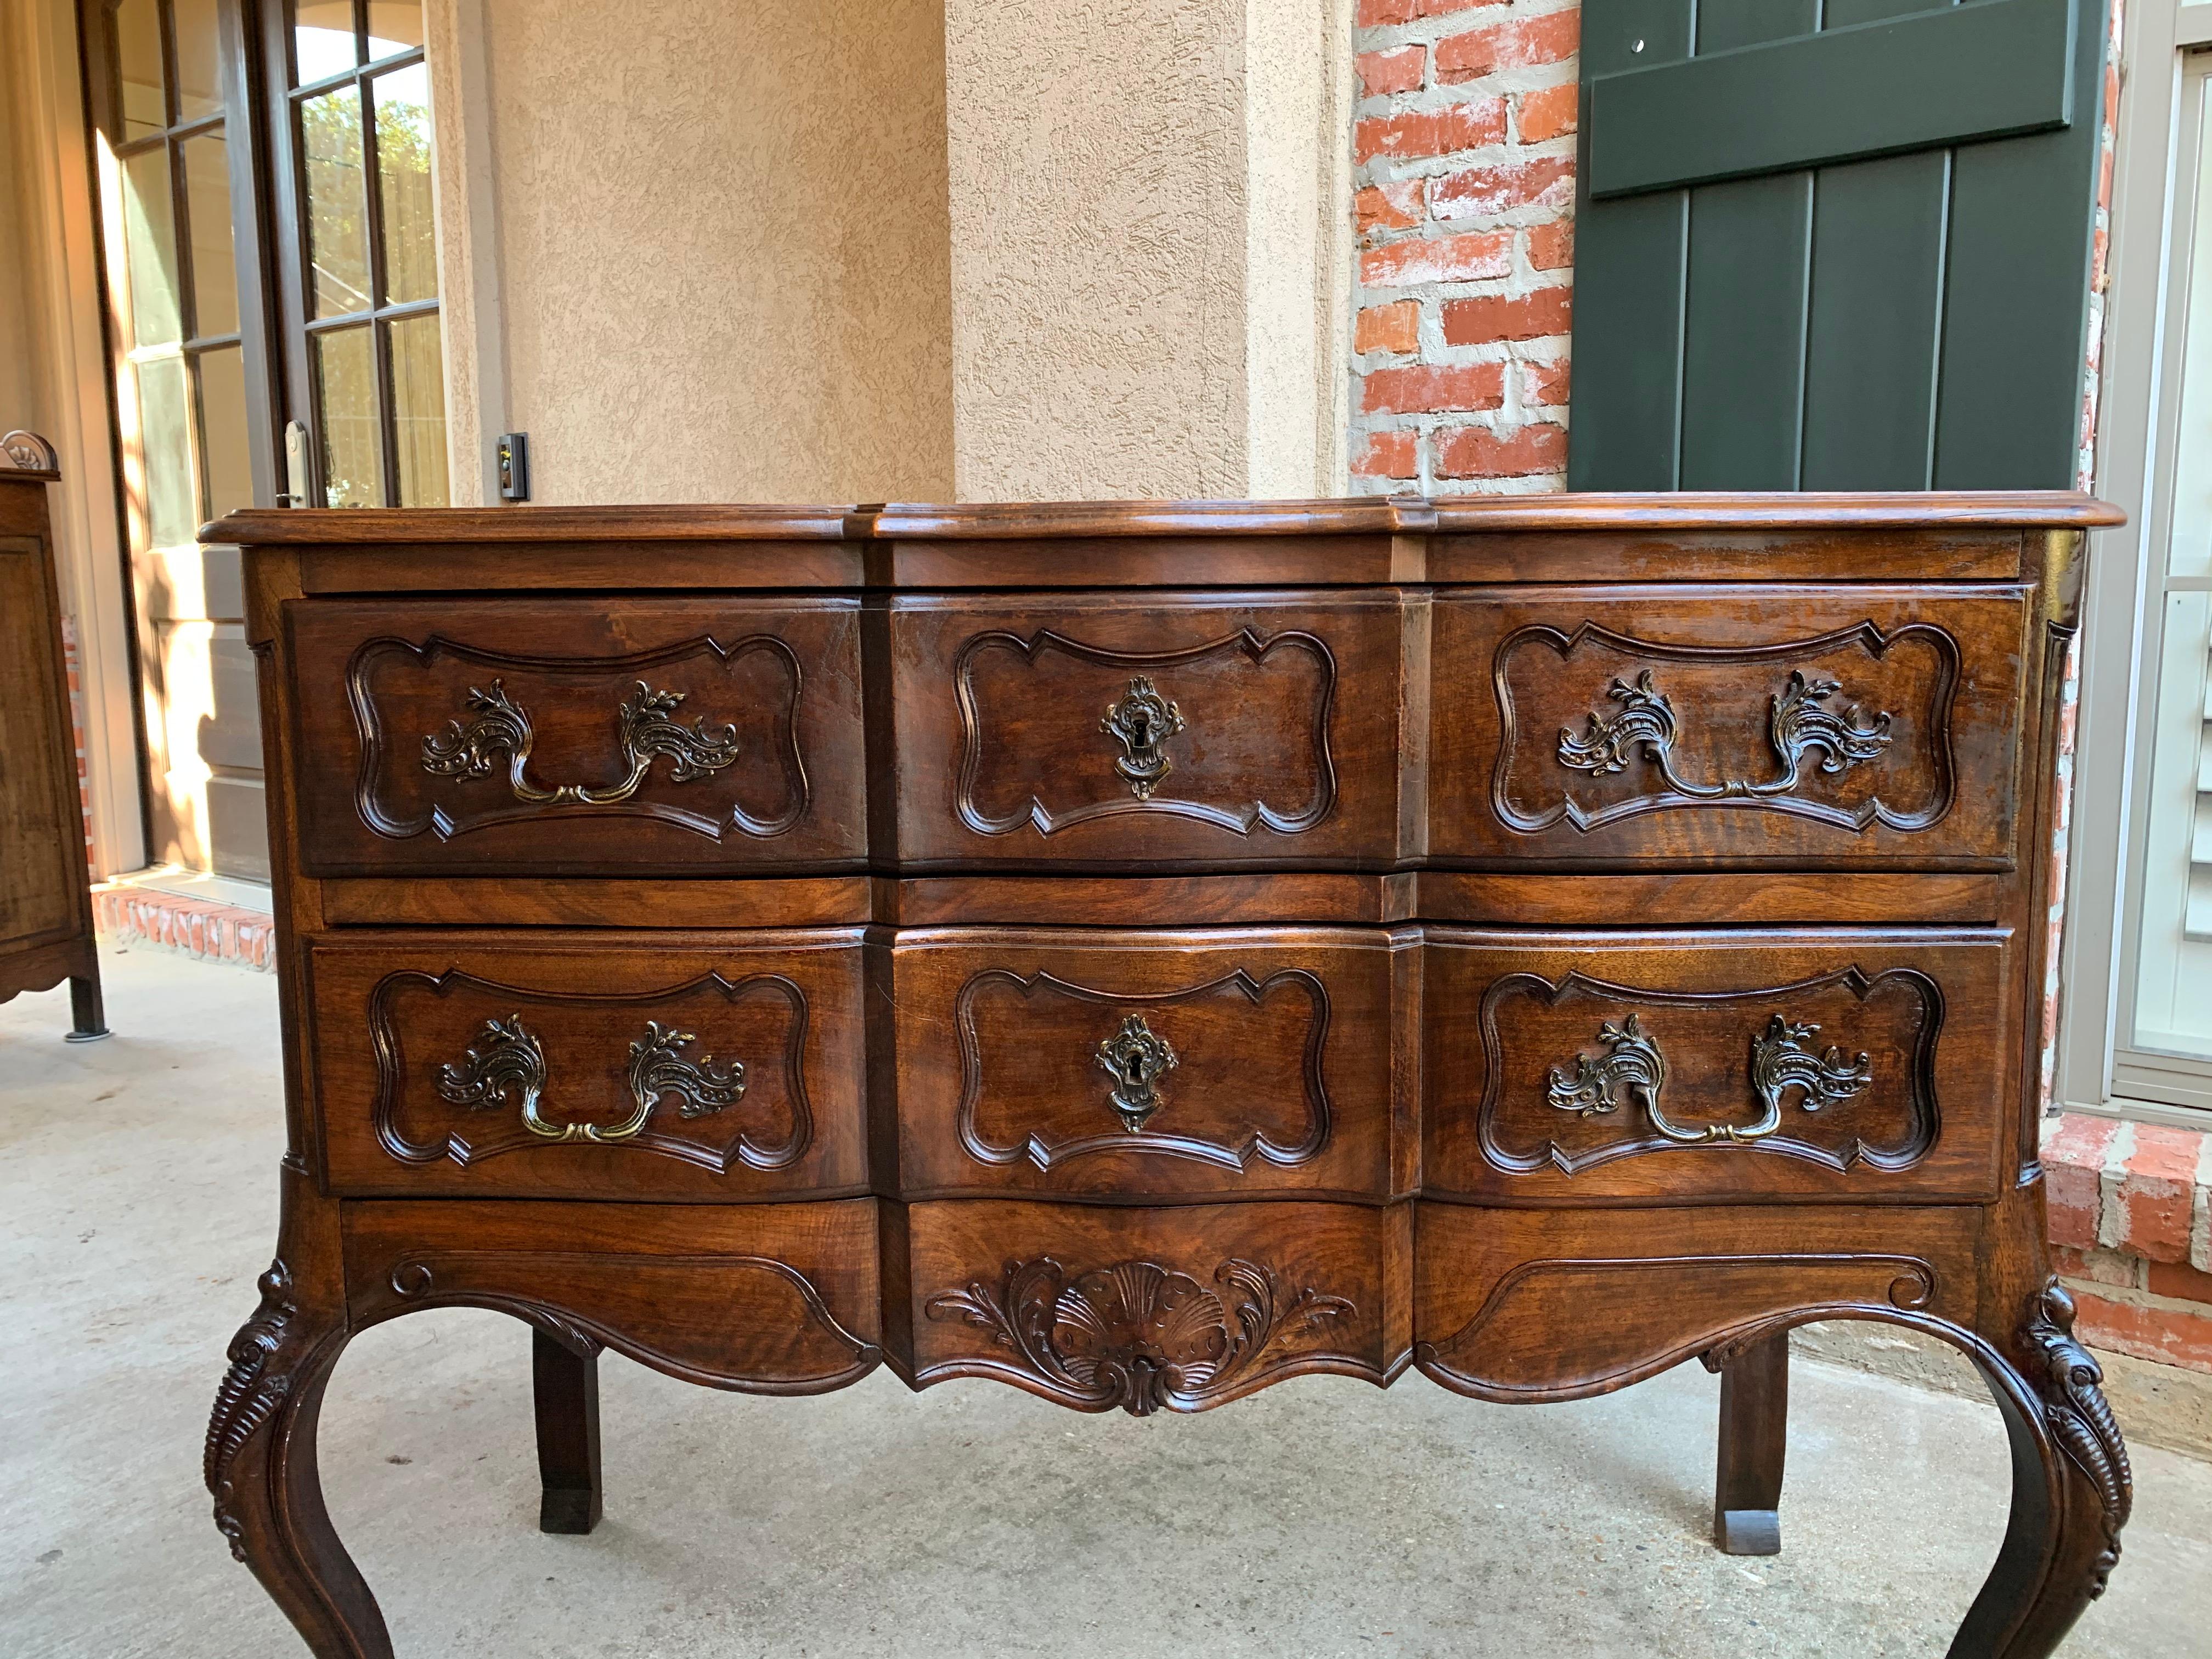 Late 19th Century Antique French Carved Walnut Commode Chest of Drawers Sideboard Louis XV Style